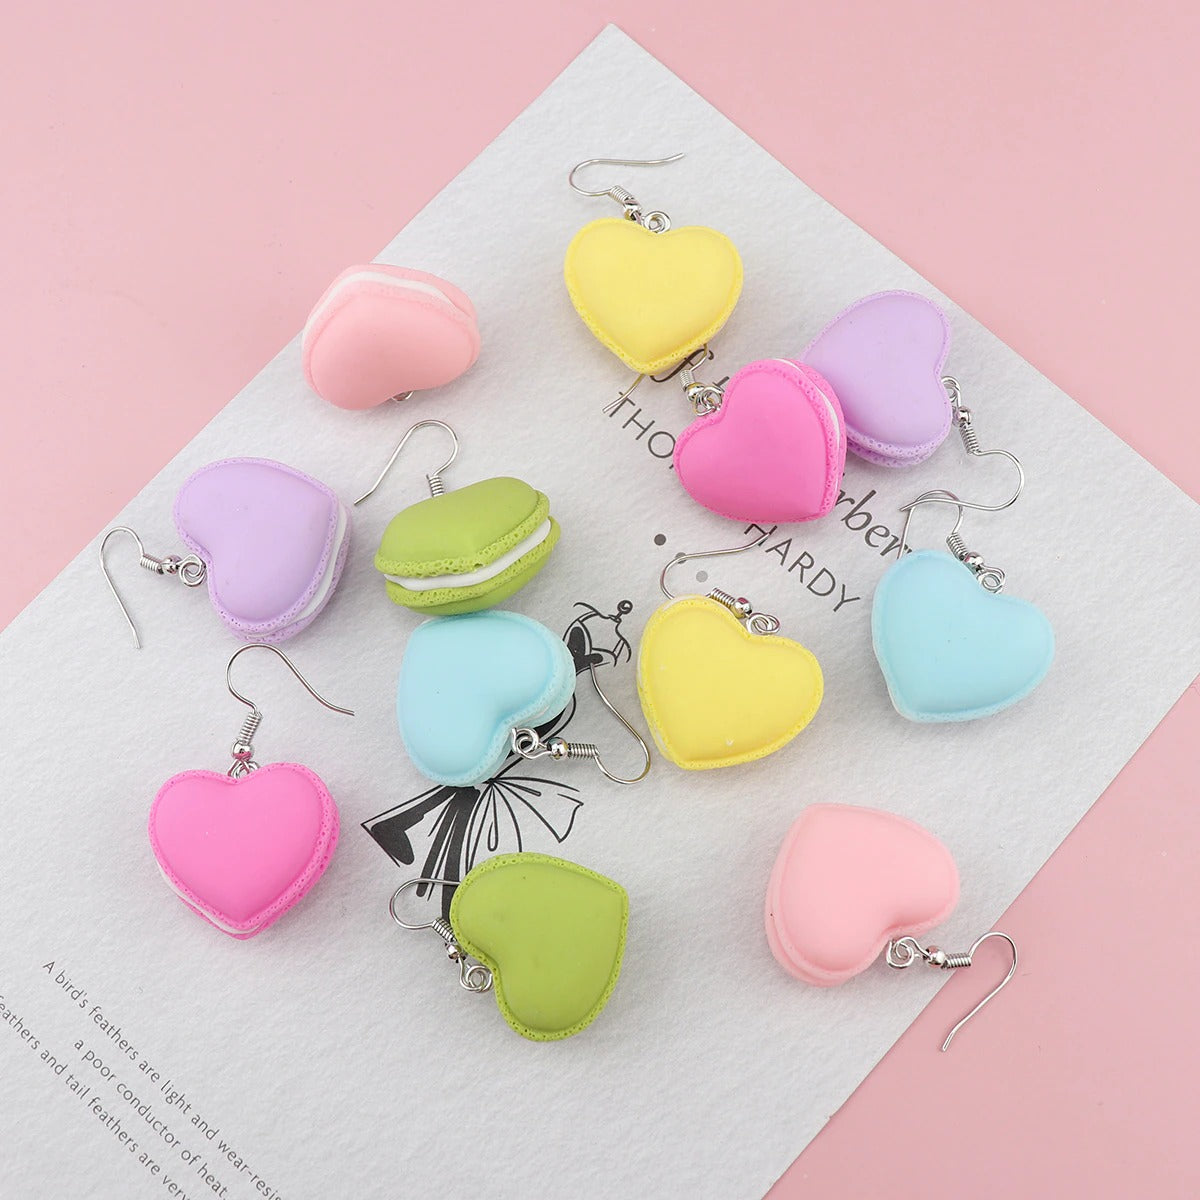 Teenytopia Dearly Beloved Macaron Earrings - Adorable polymer clay earrings shaped like heart-shaped macaron cookies, filled with cream. Cute!